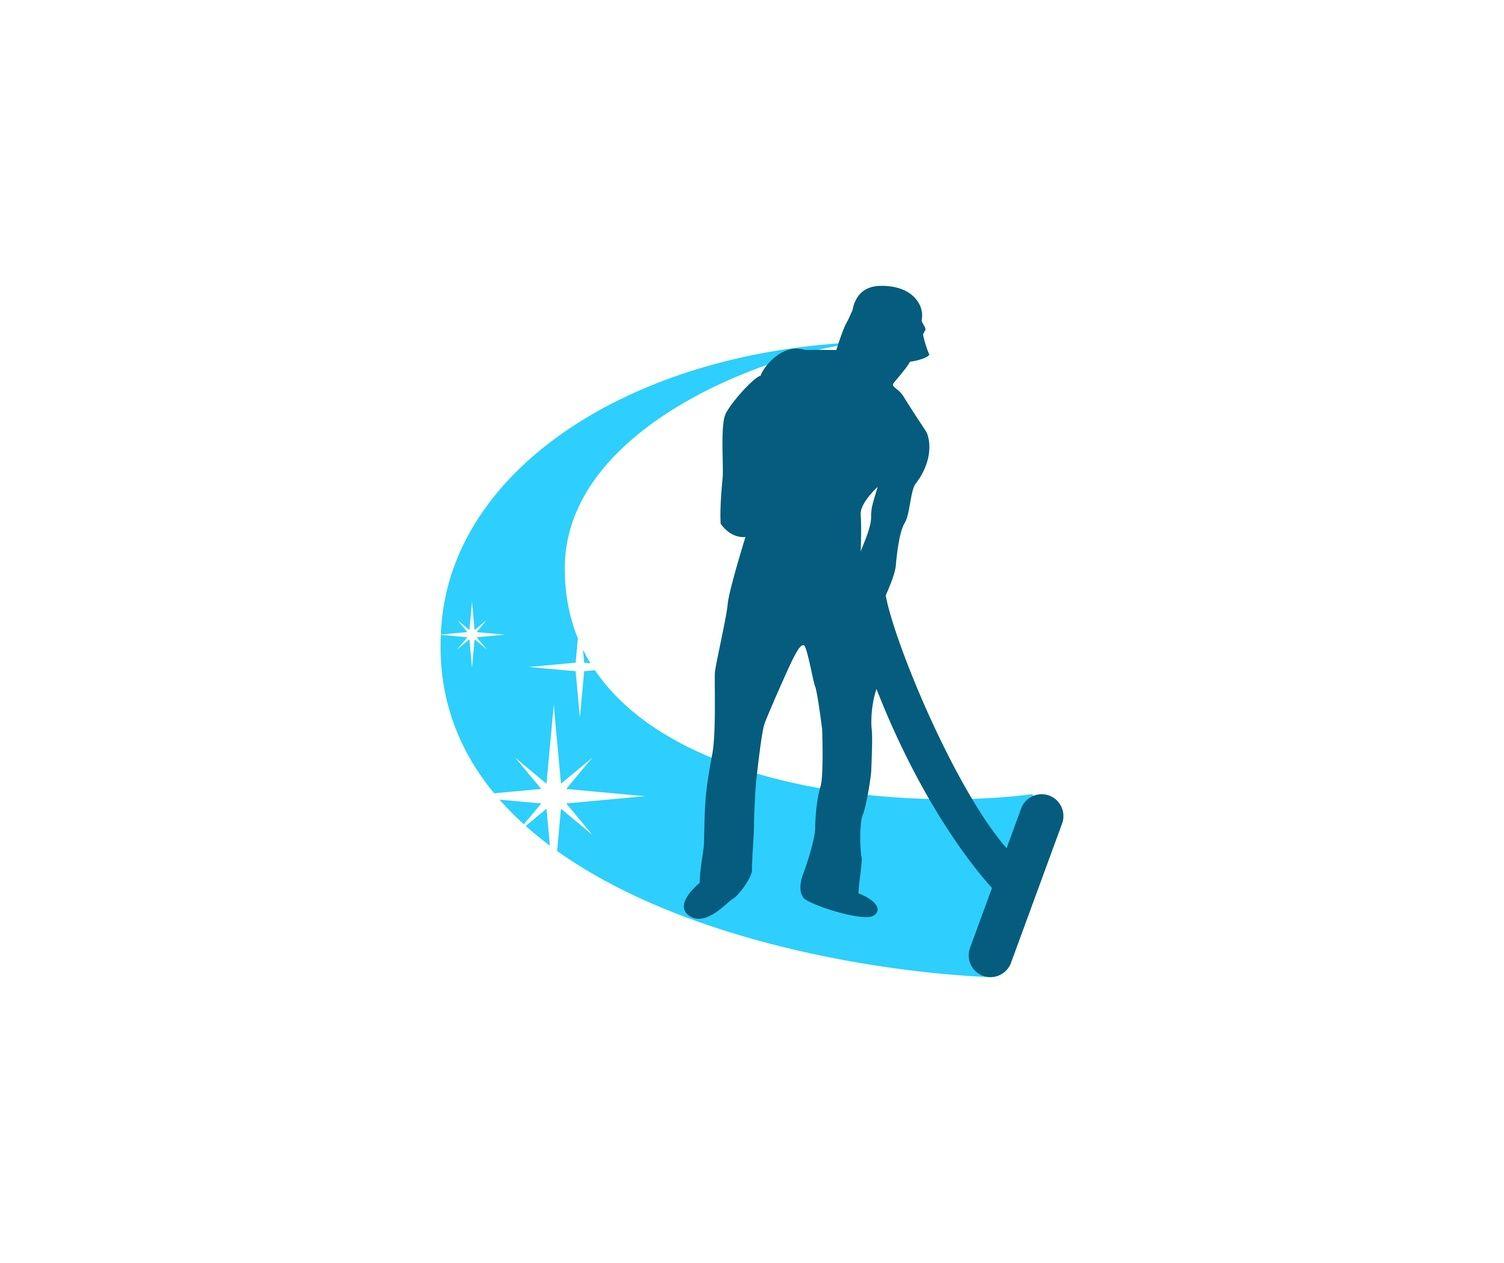 Cleaning Logo - How Creating a Cleaning Company Logo Can Launch Your Business ...